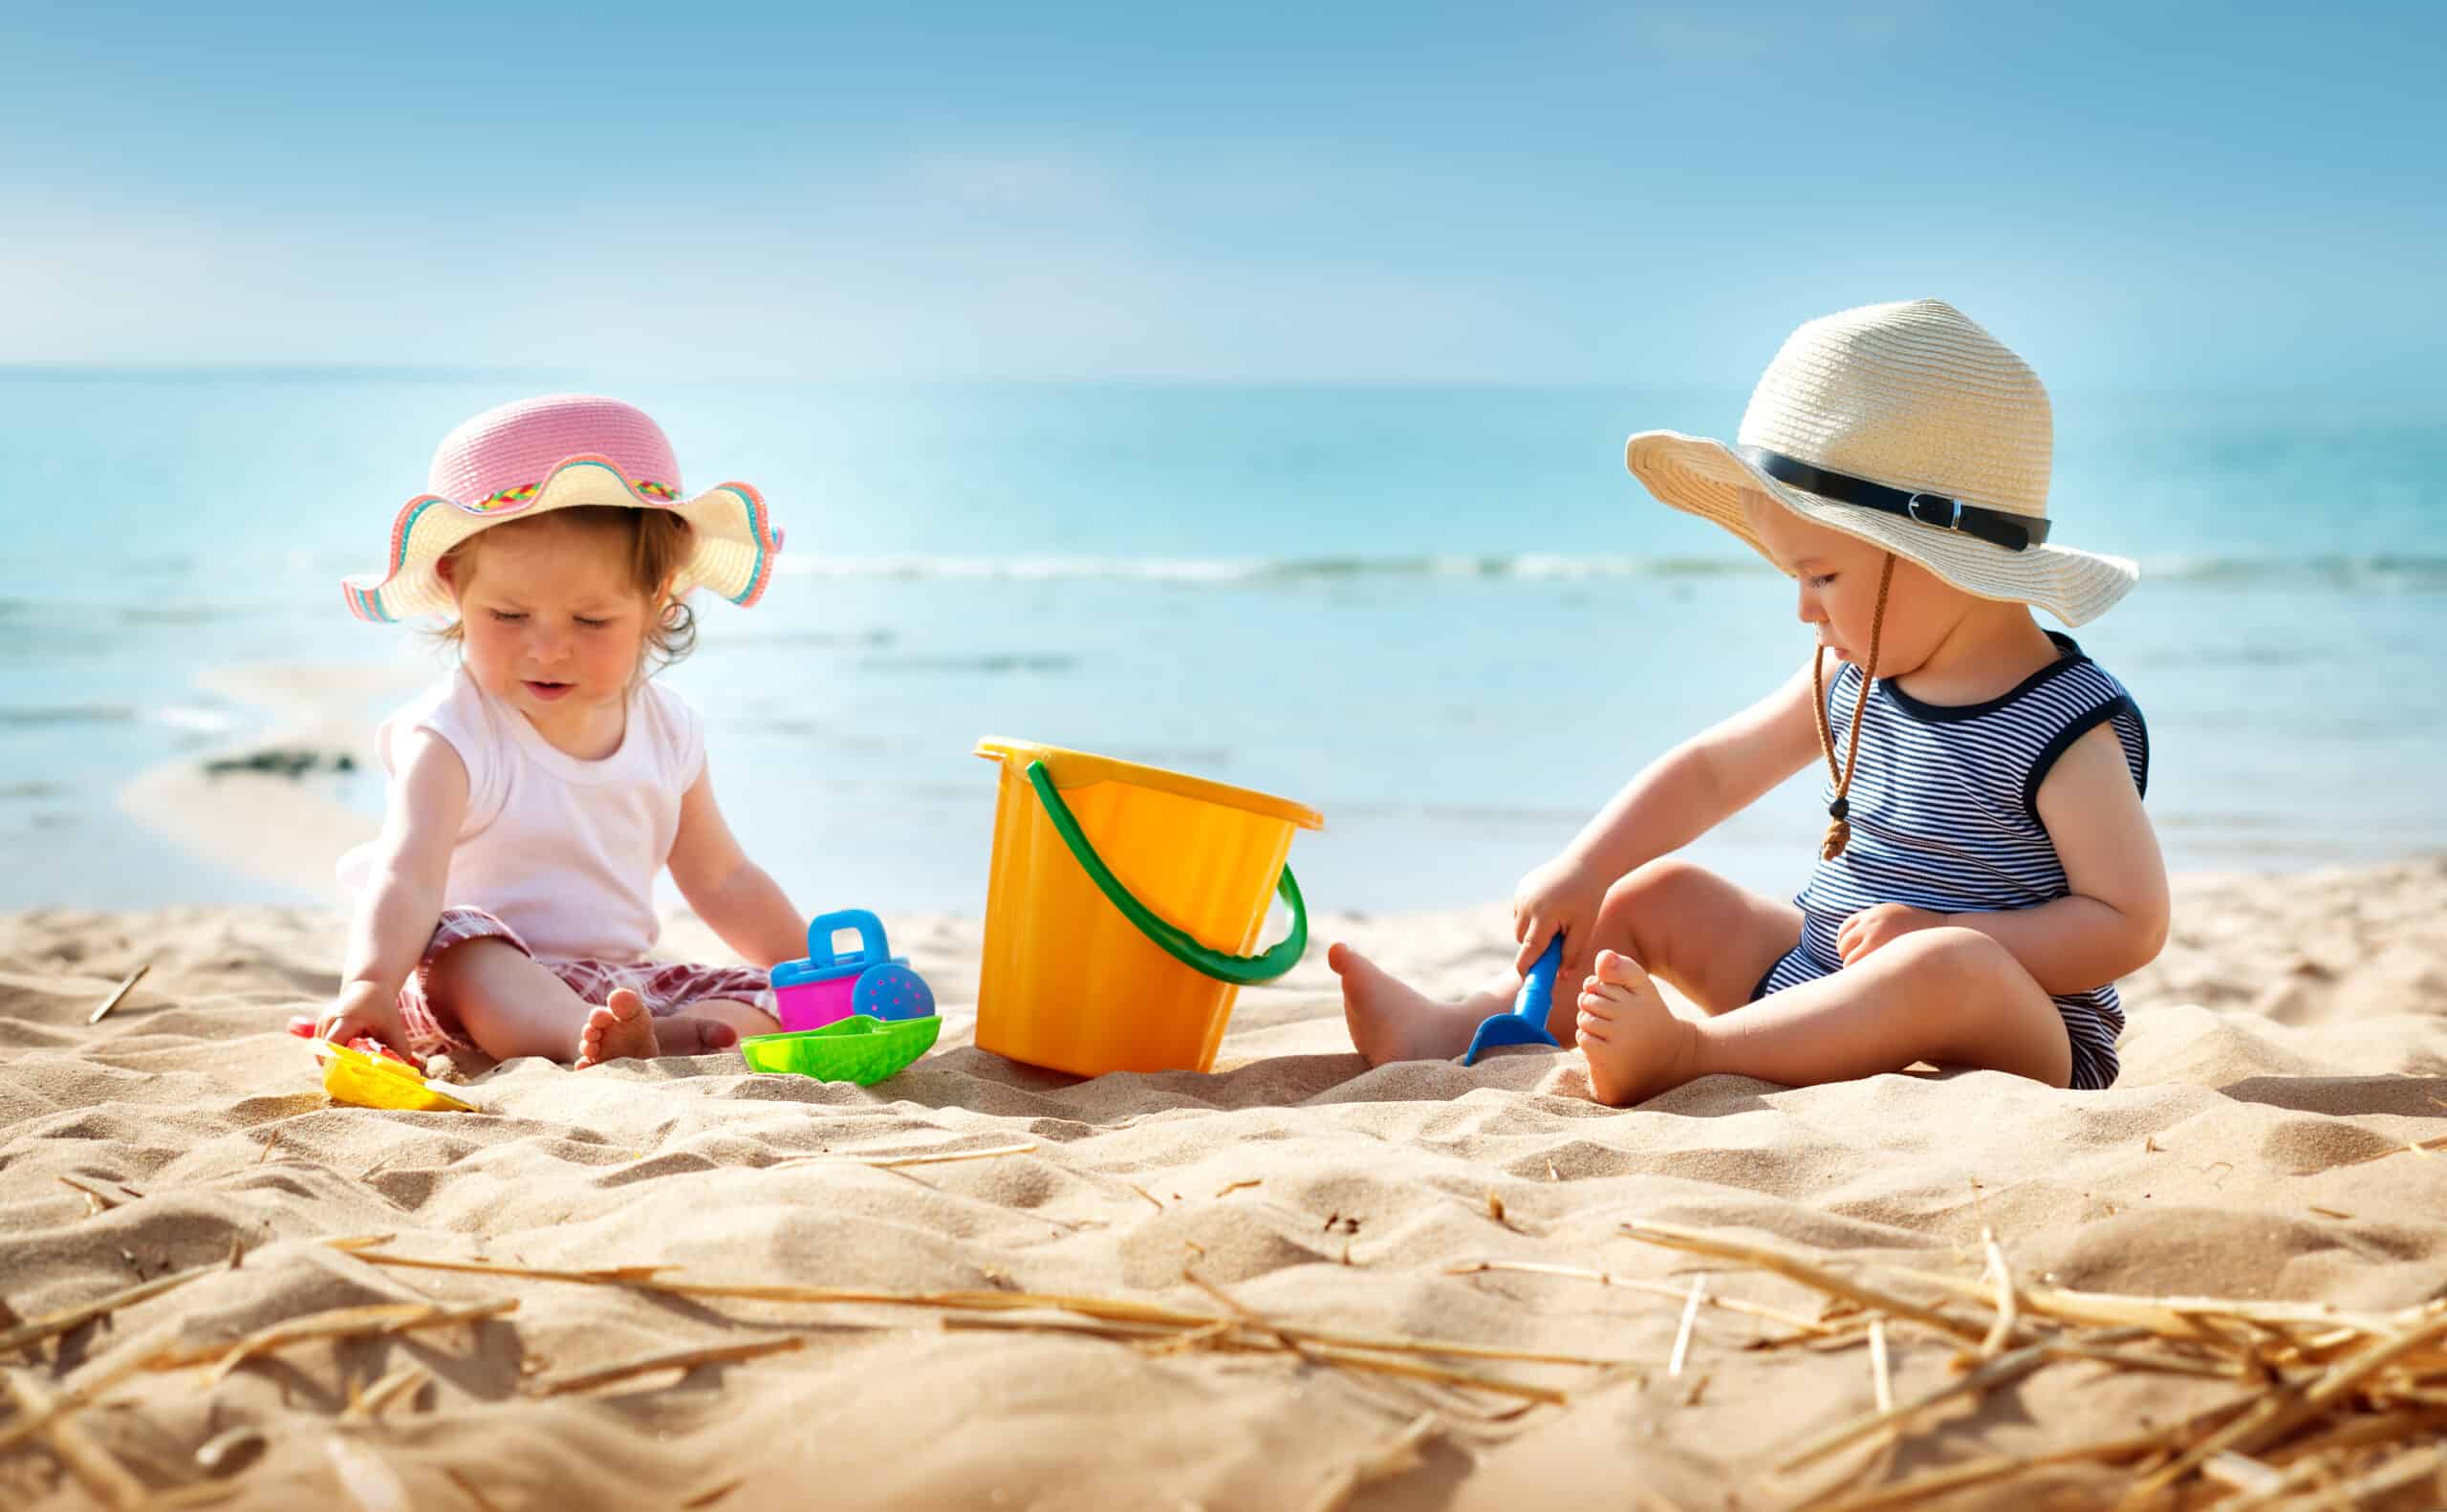 Babygirl and babyboy sitting on the beach in straw hats